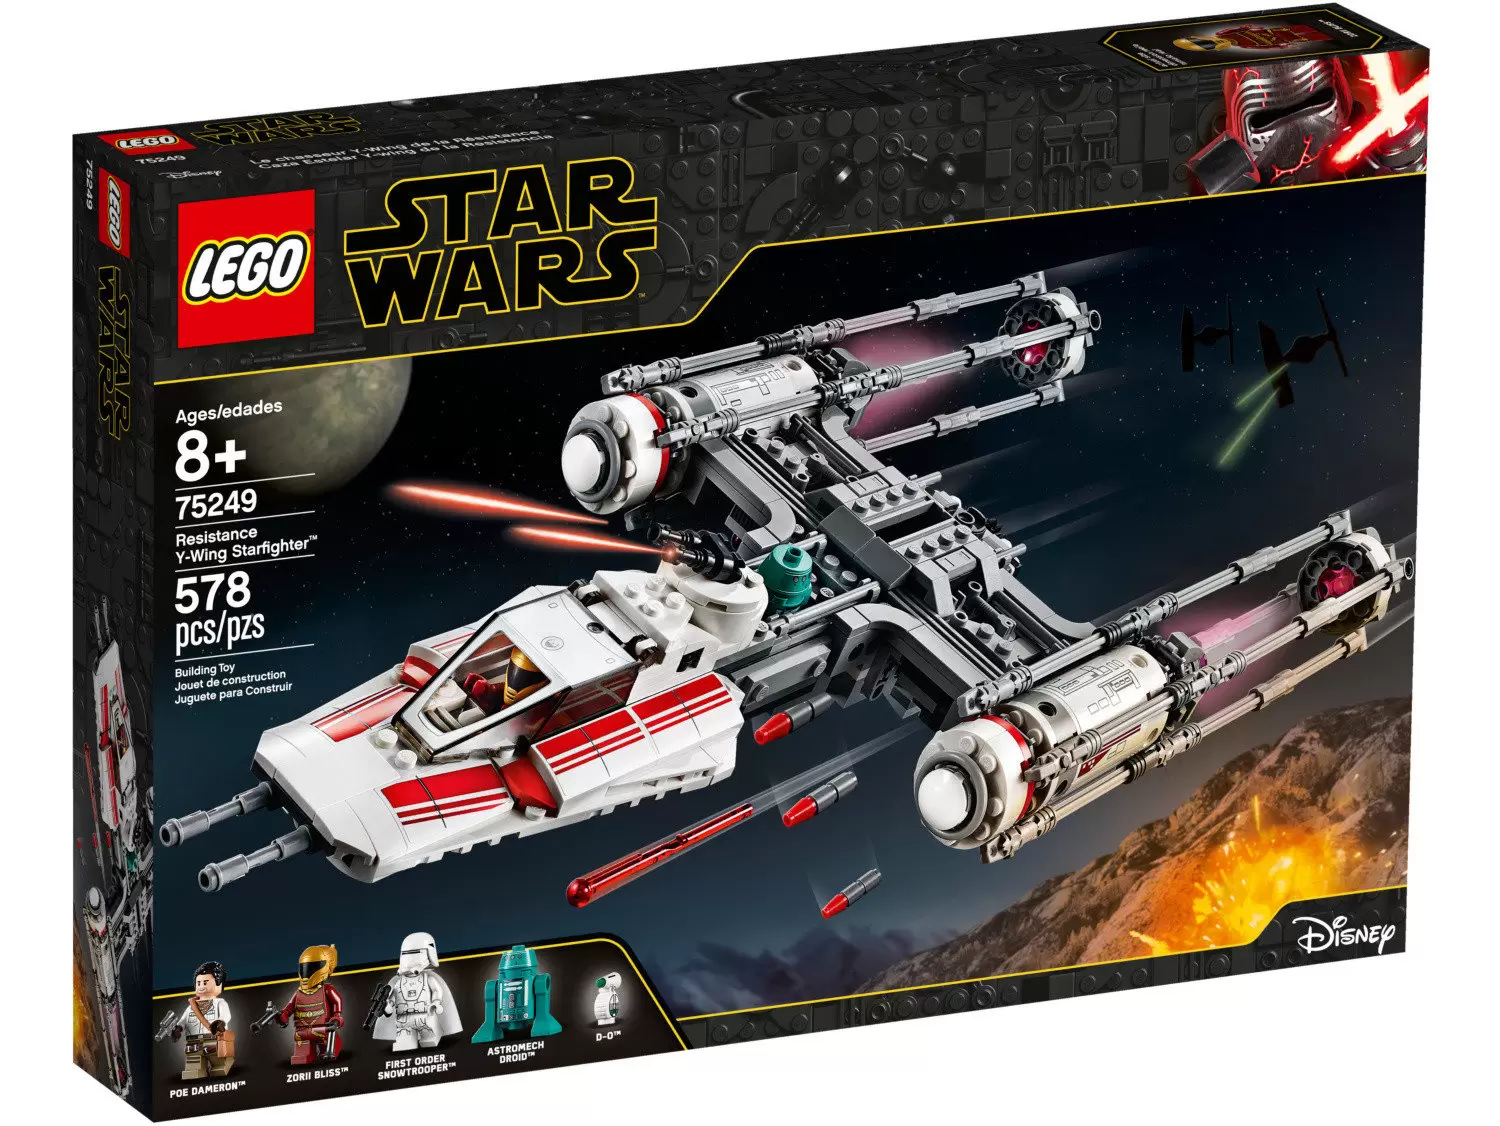 LEGO Star Wars - Resistance Y-Wing Fighter